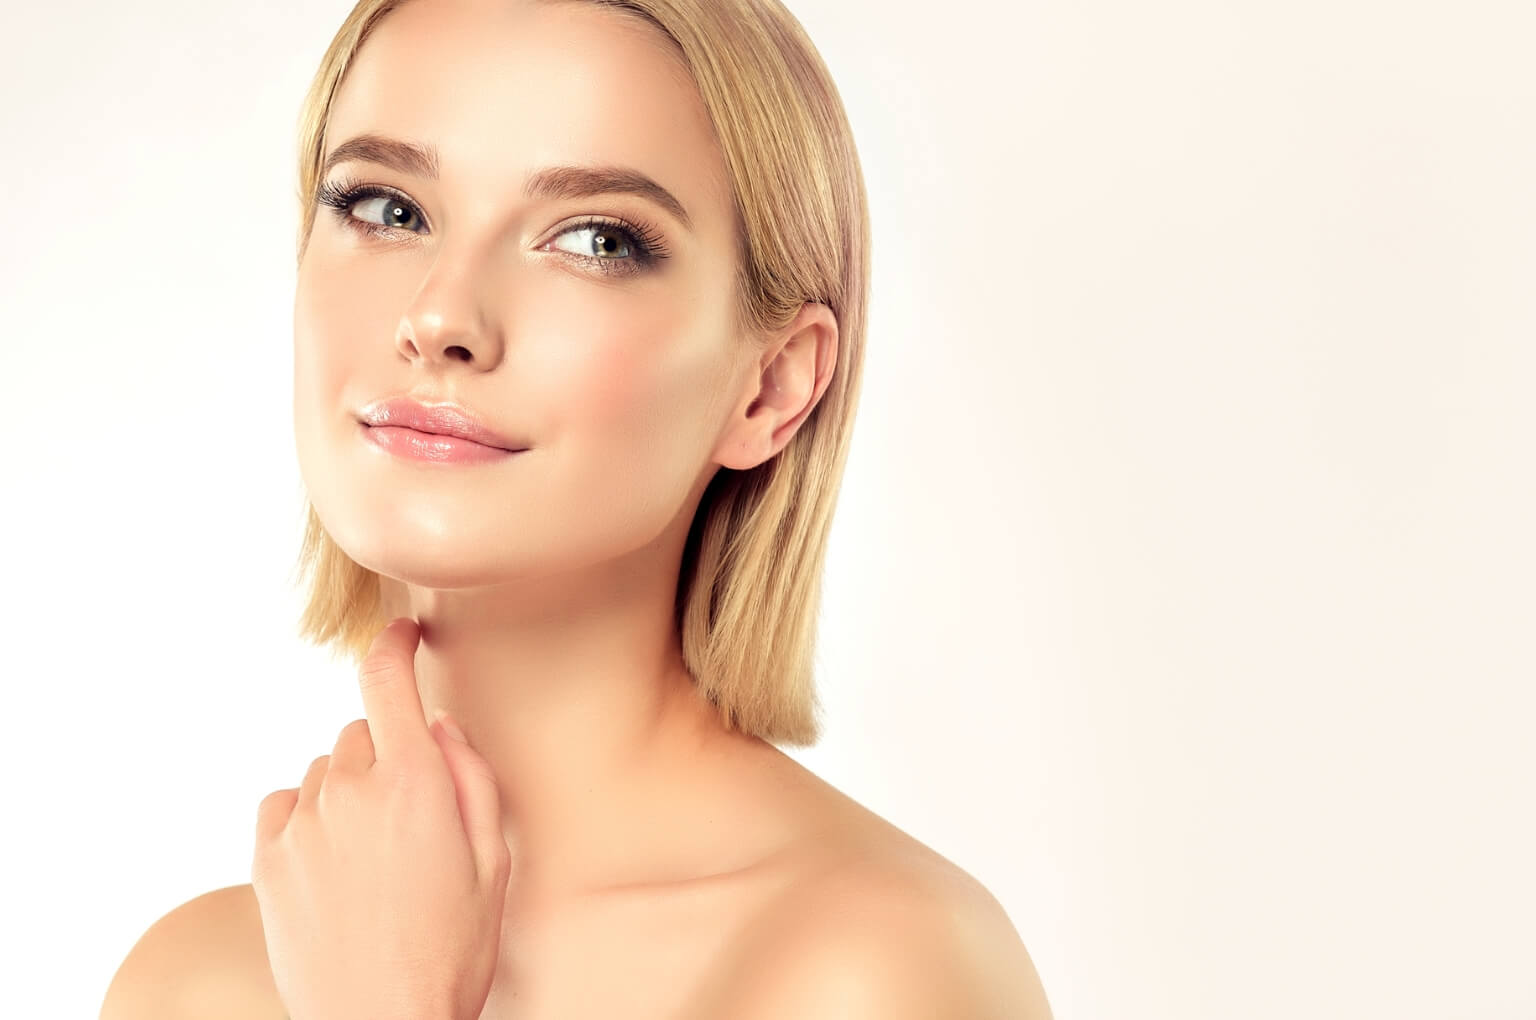 Is it safe to get dermal fillers every year?